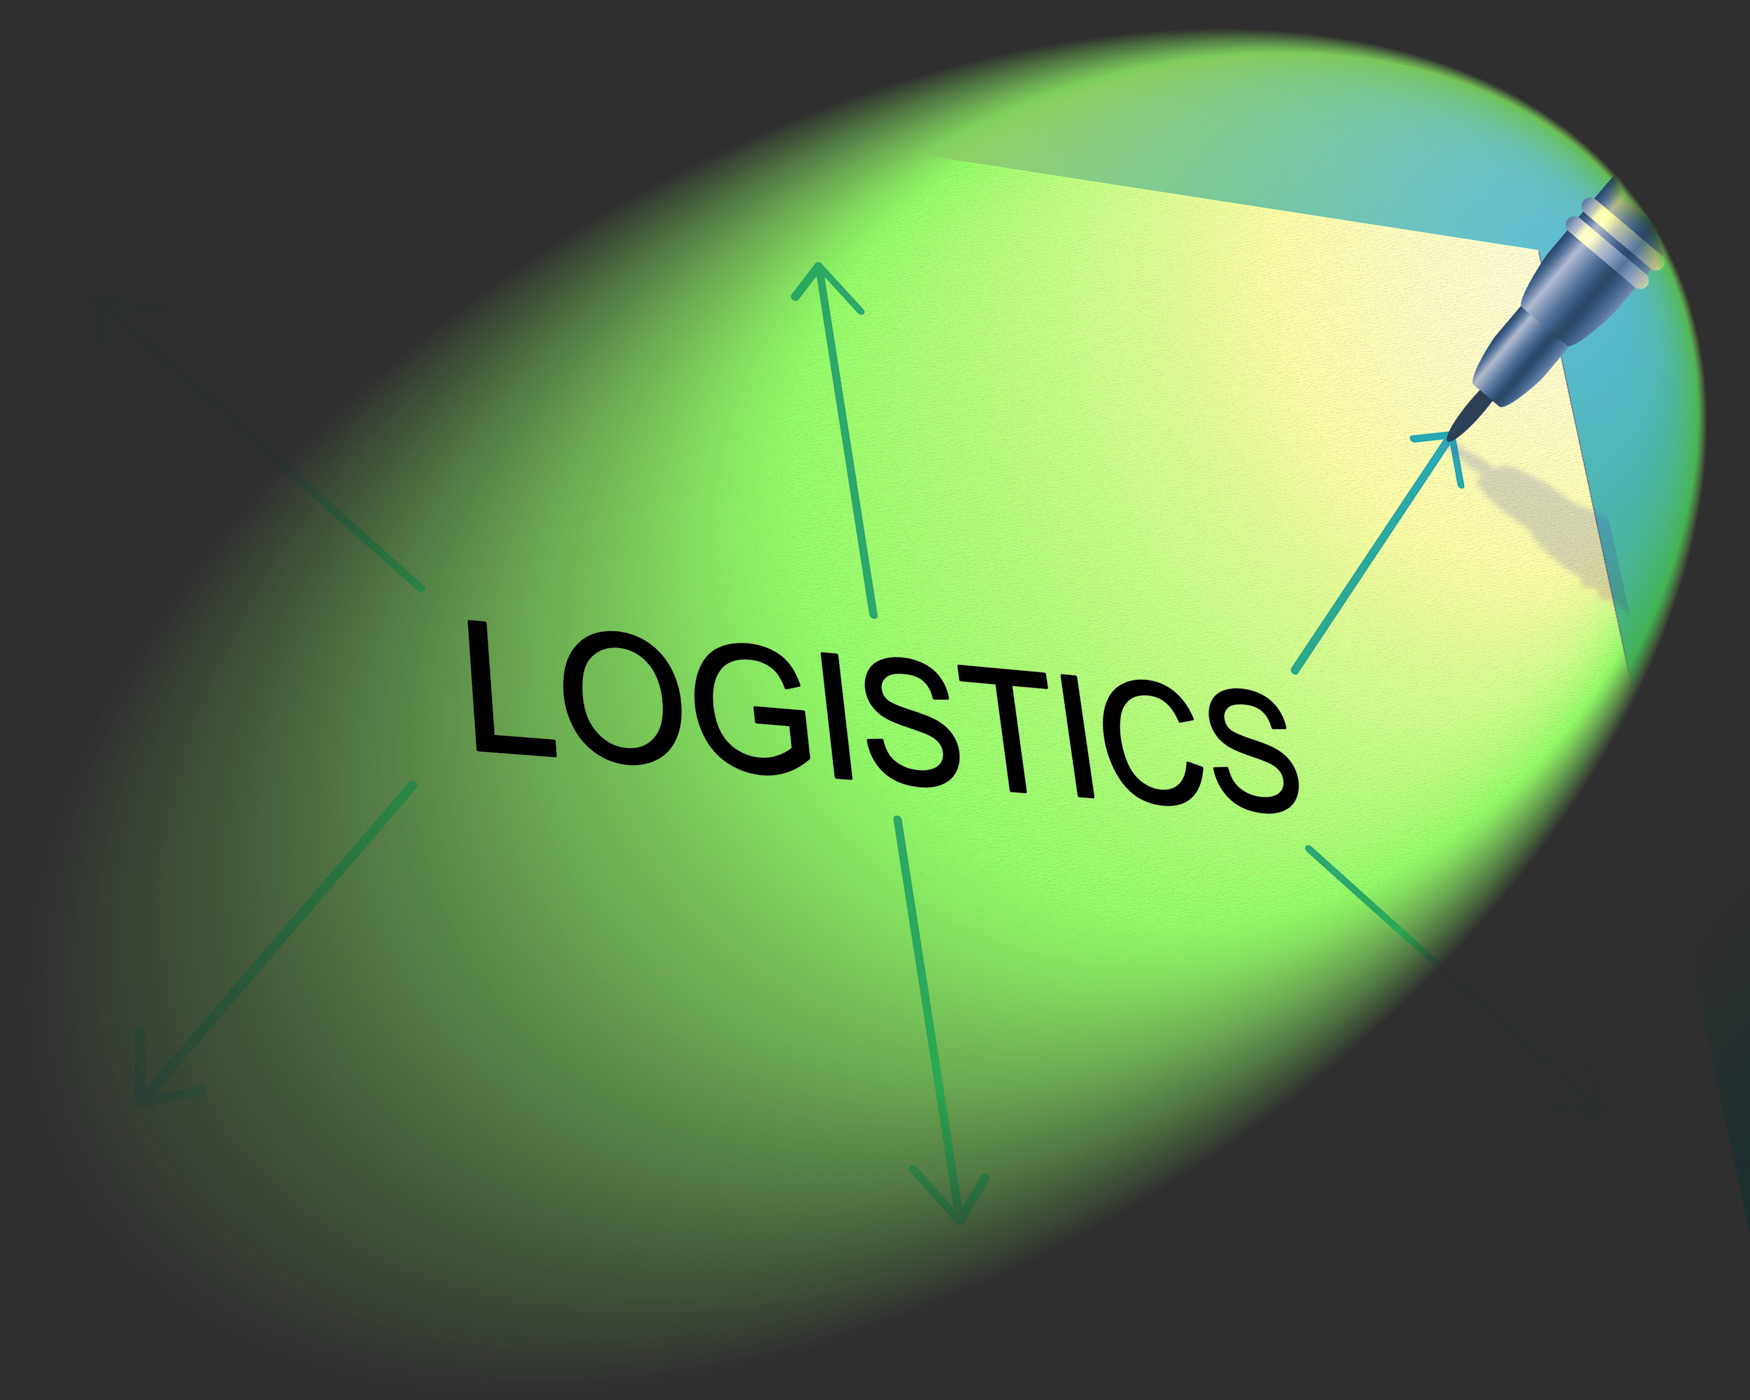 Logistics distribution represents supply chain and analysis photo